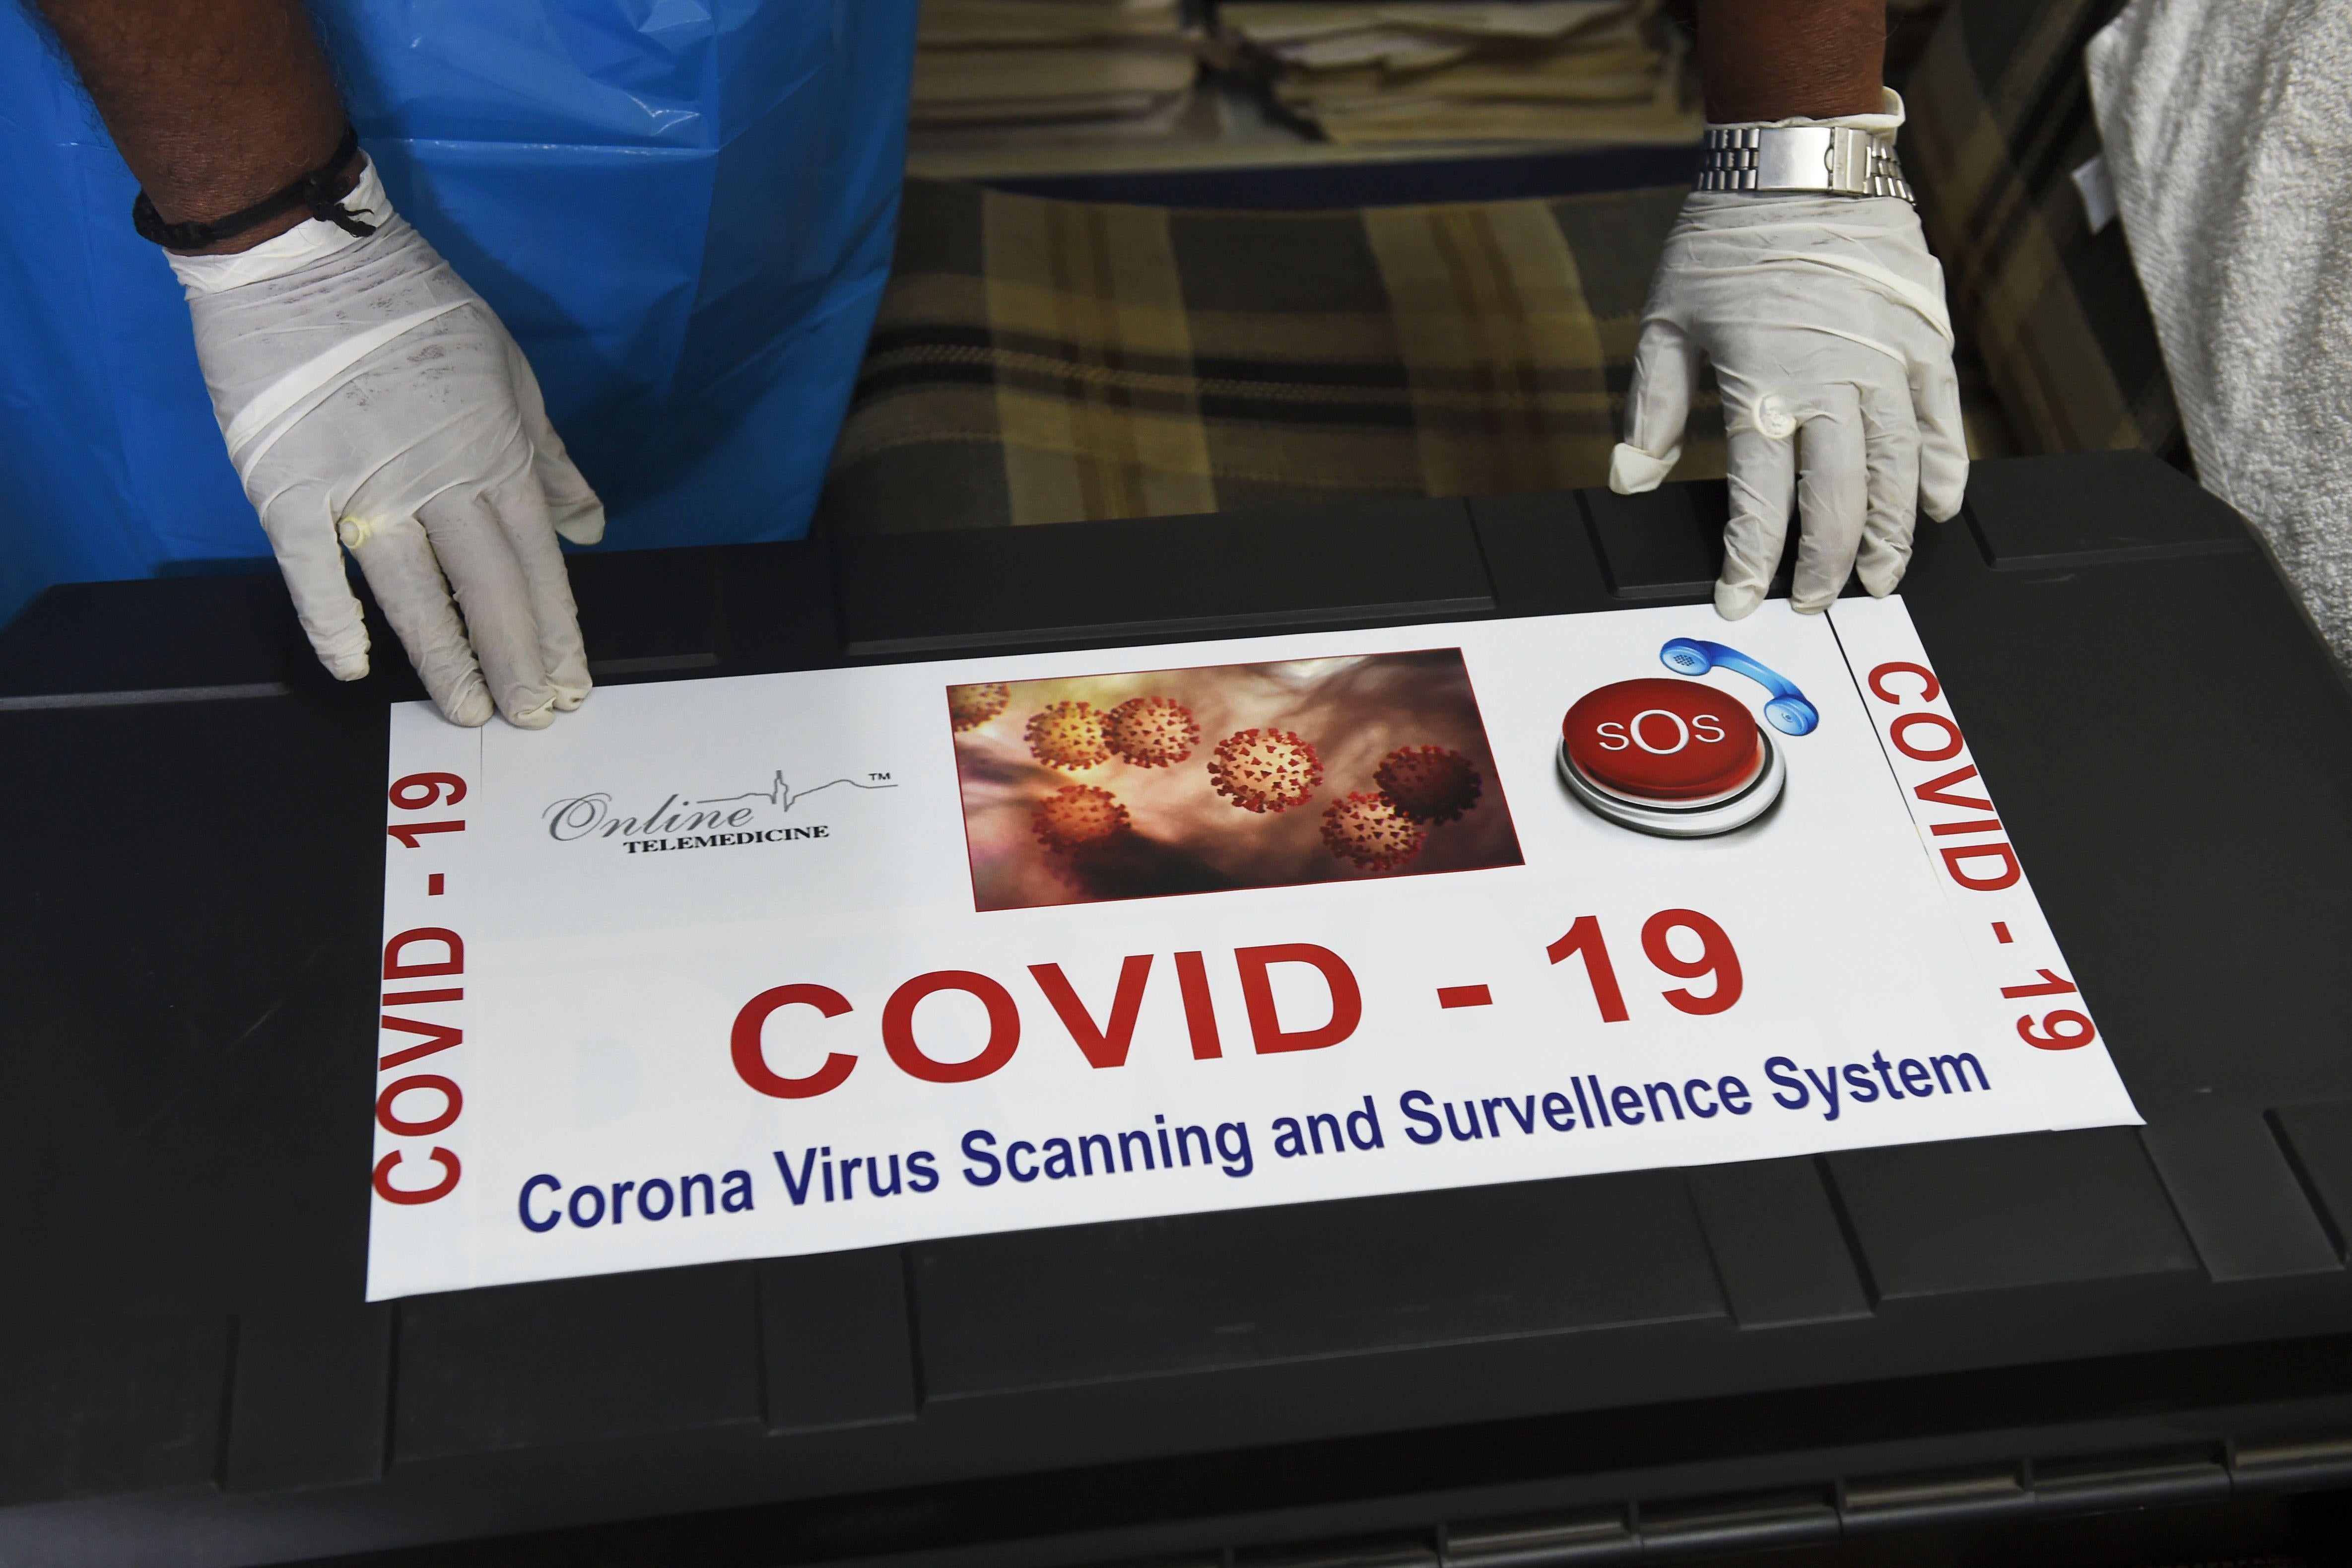 A box labeled COVID-19 scanning system.